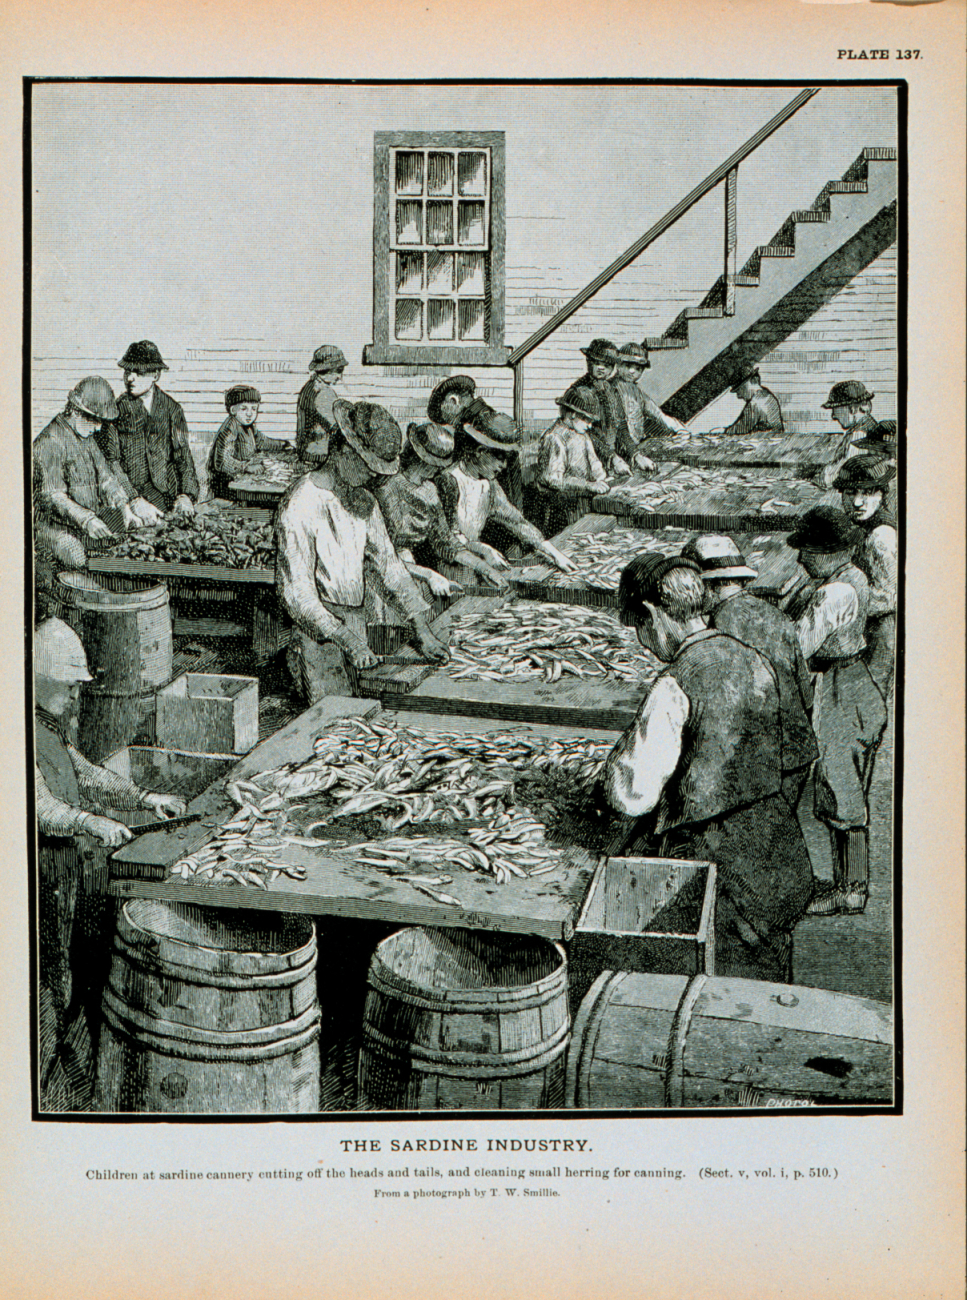 Children at sardine cannery cutting off the heads and tails of herringCleaning herring for canningFrom a photograph by T